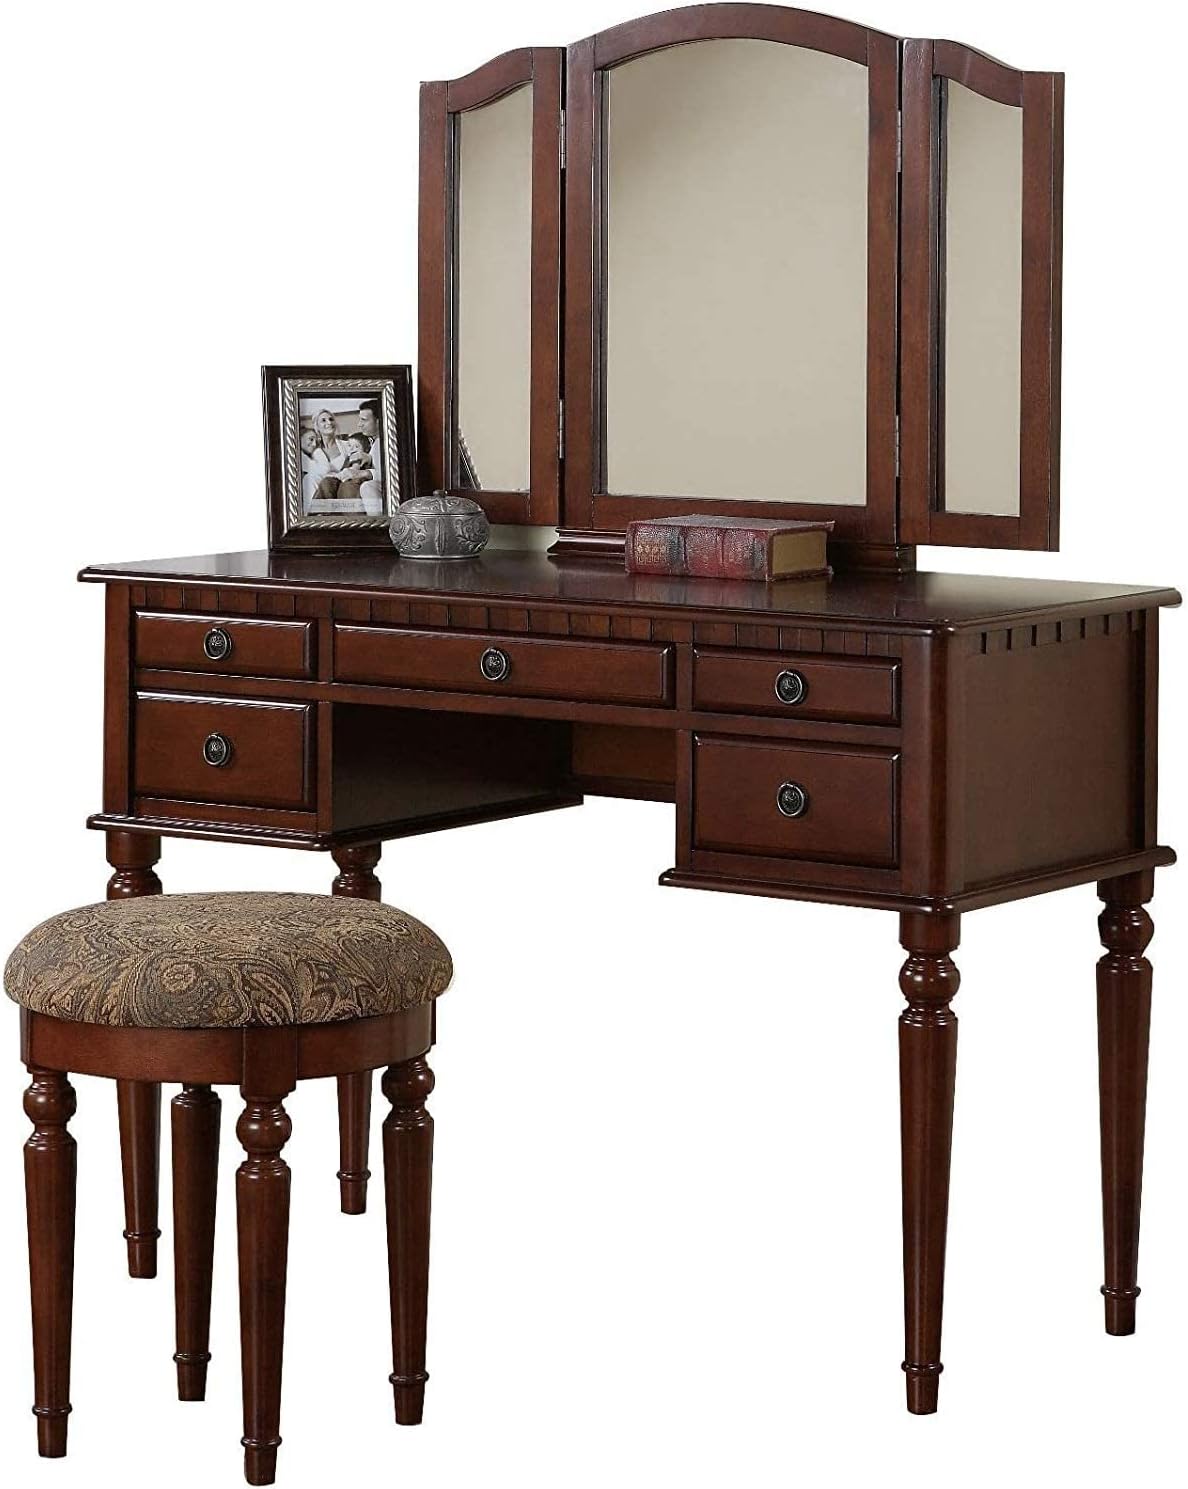 Bobkona F4071 St. Croix Collection Vanity Set with Stool, Cherry